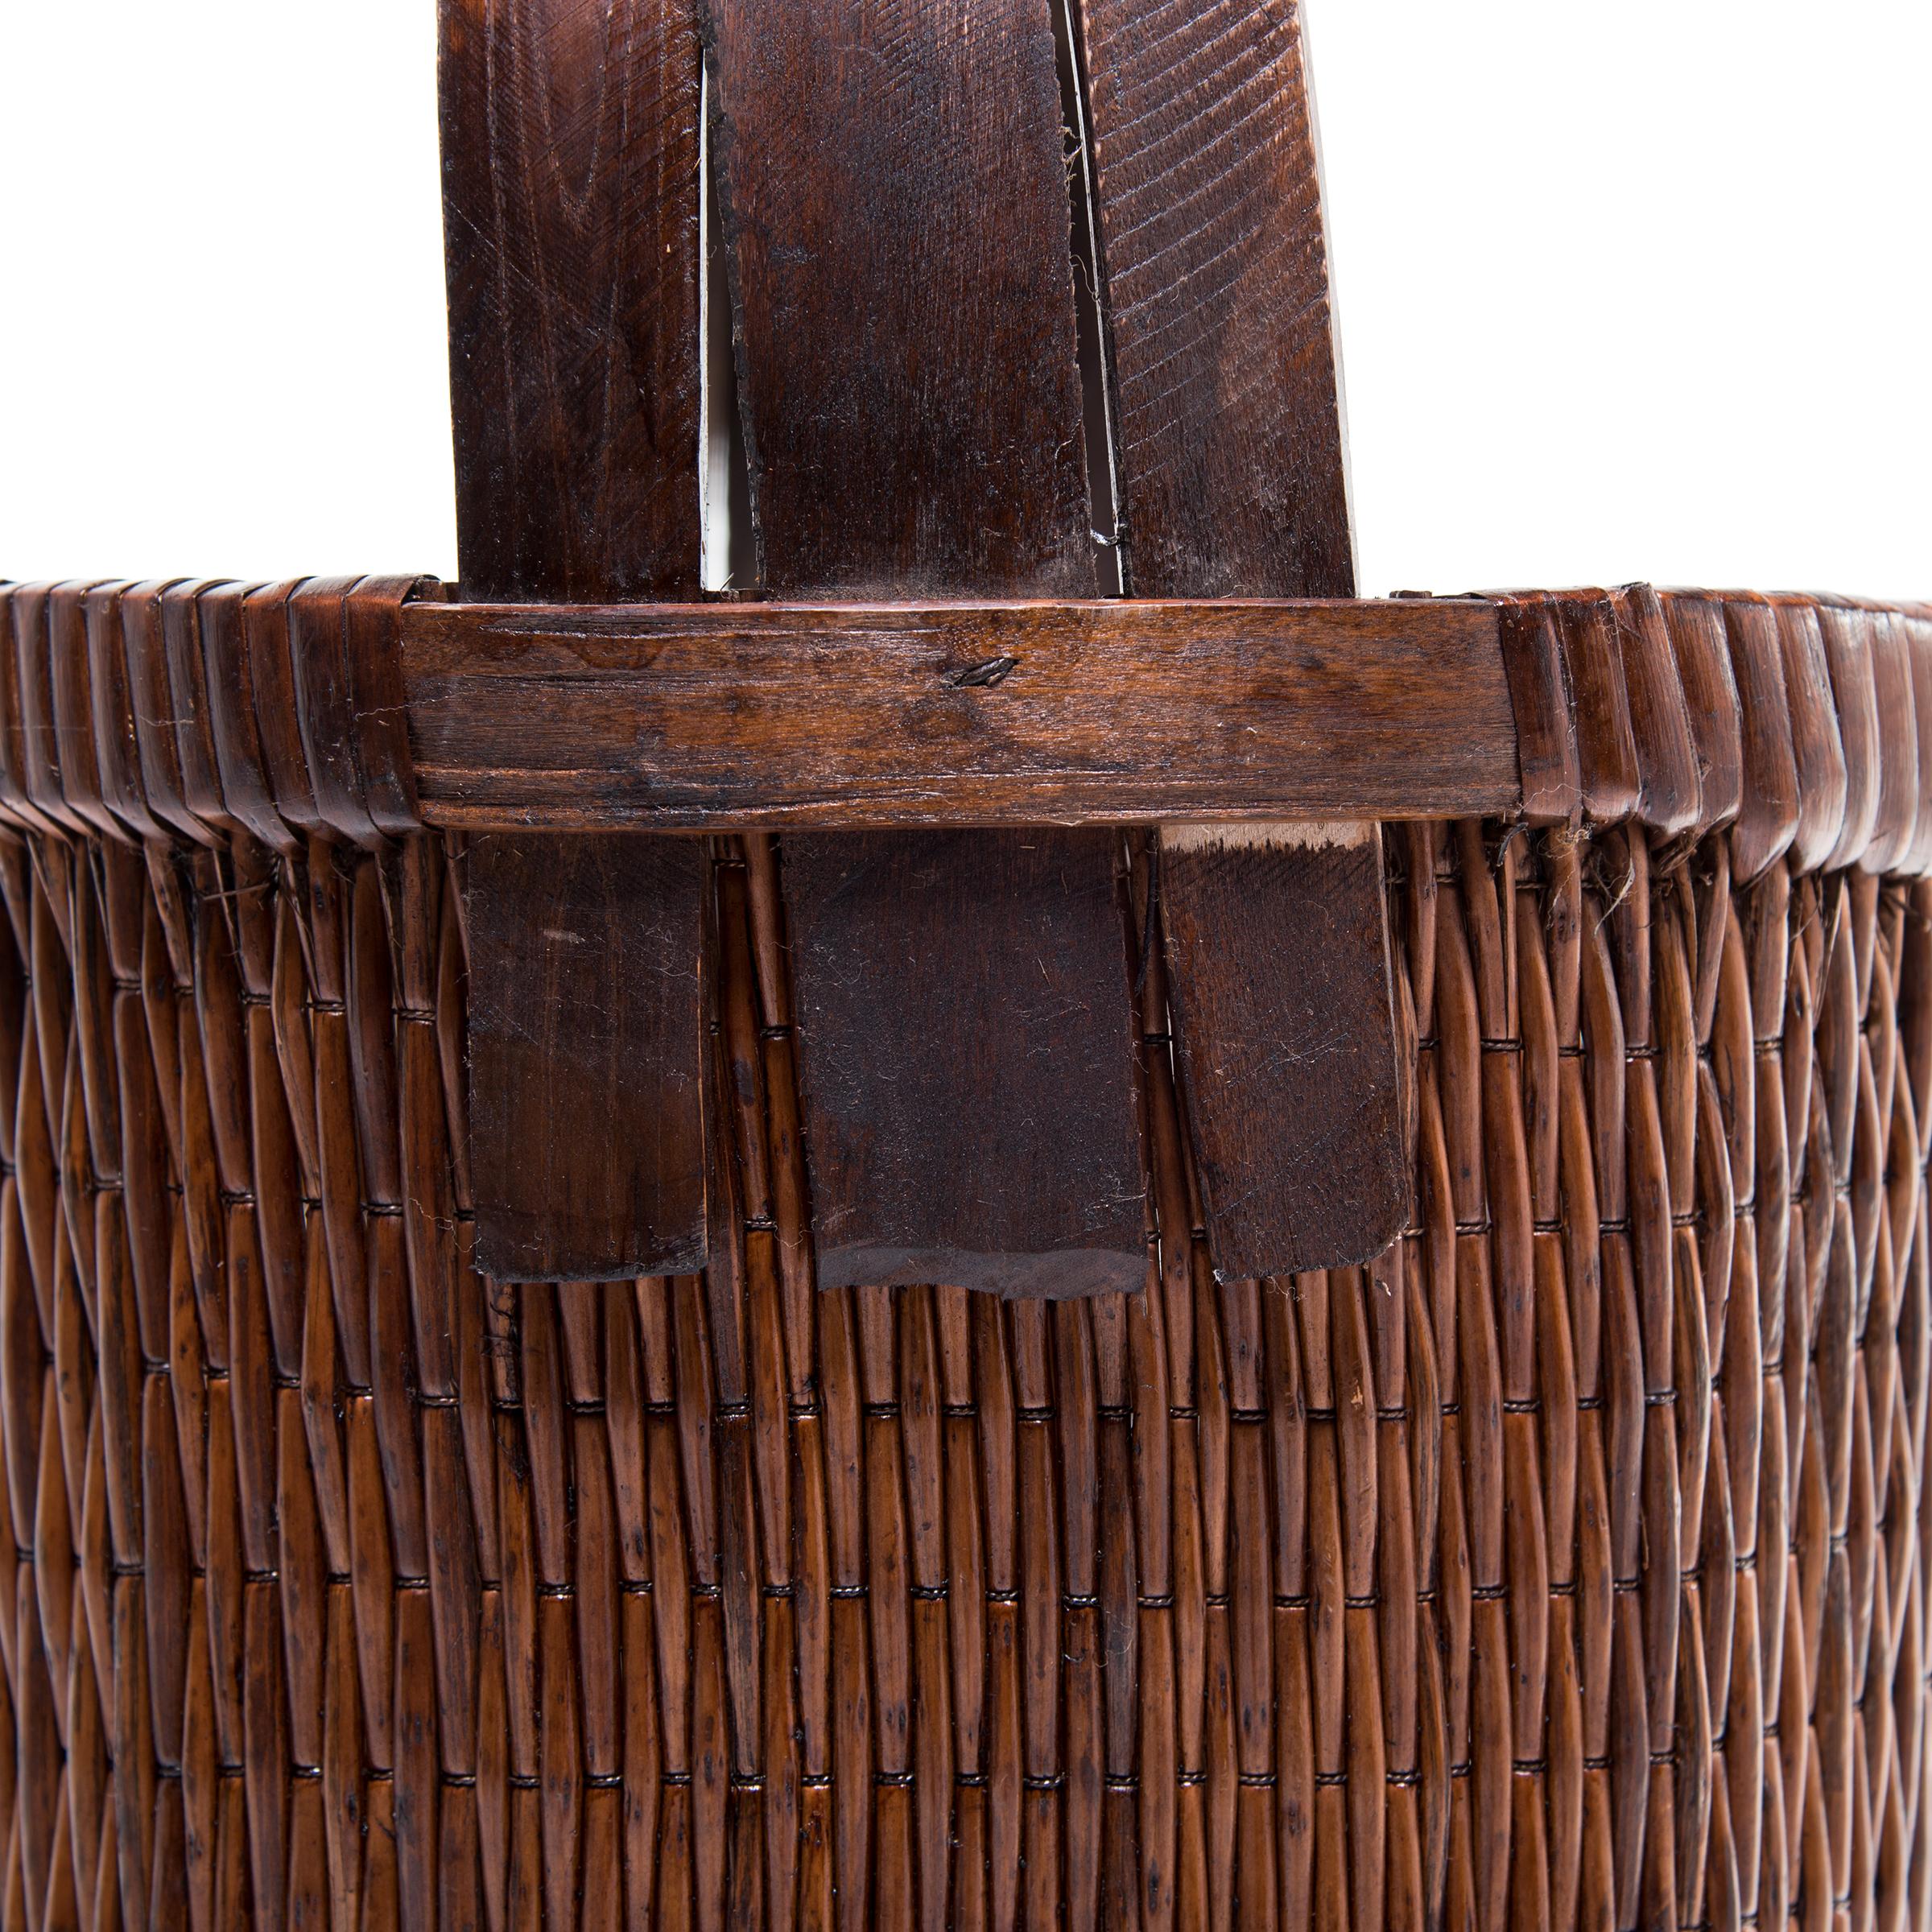 20th Century Chinese Bent Handle Fisherman's Basket, circa 1900 For Sale